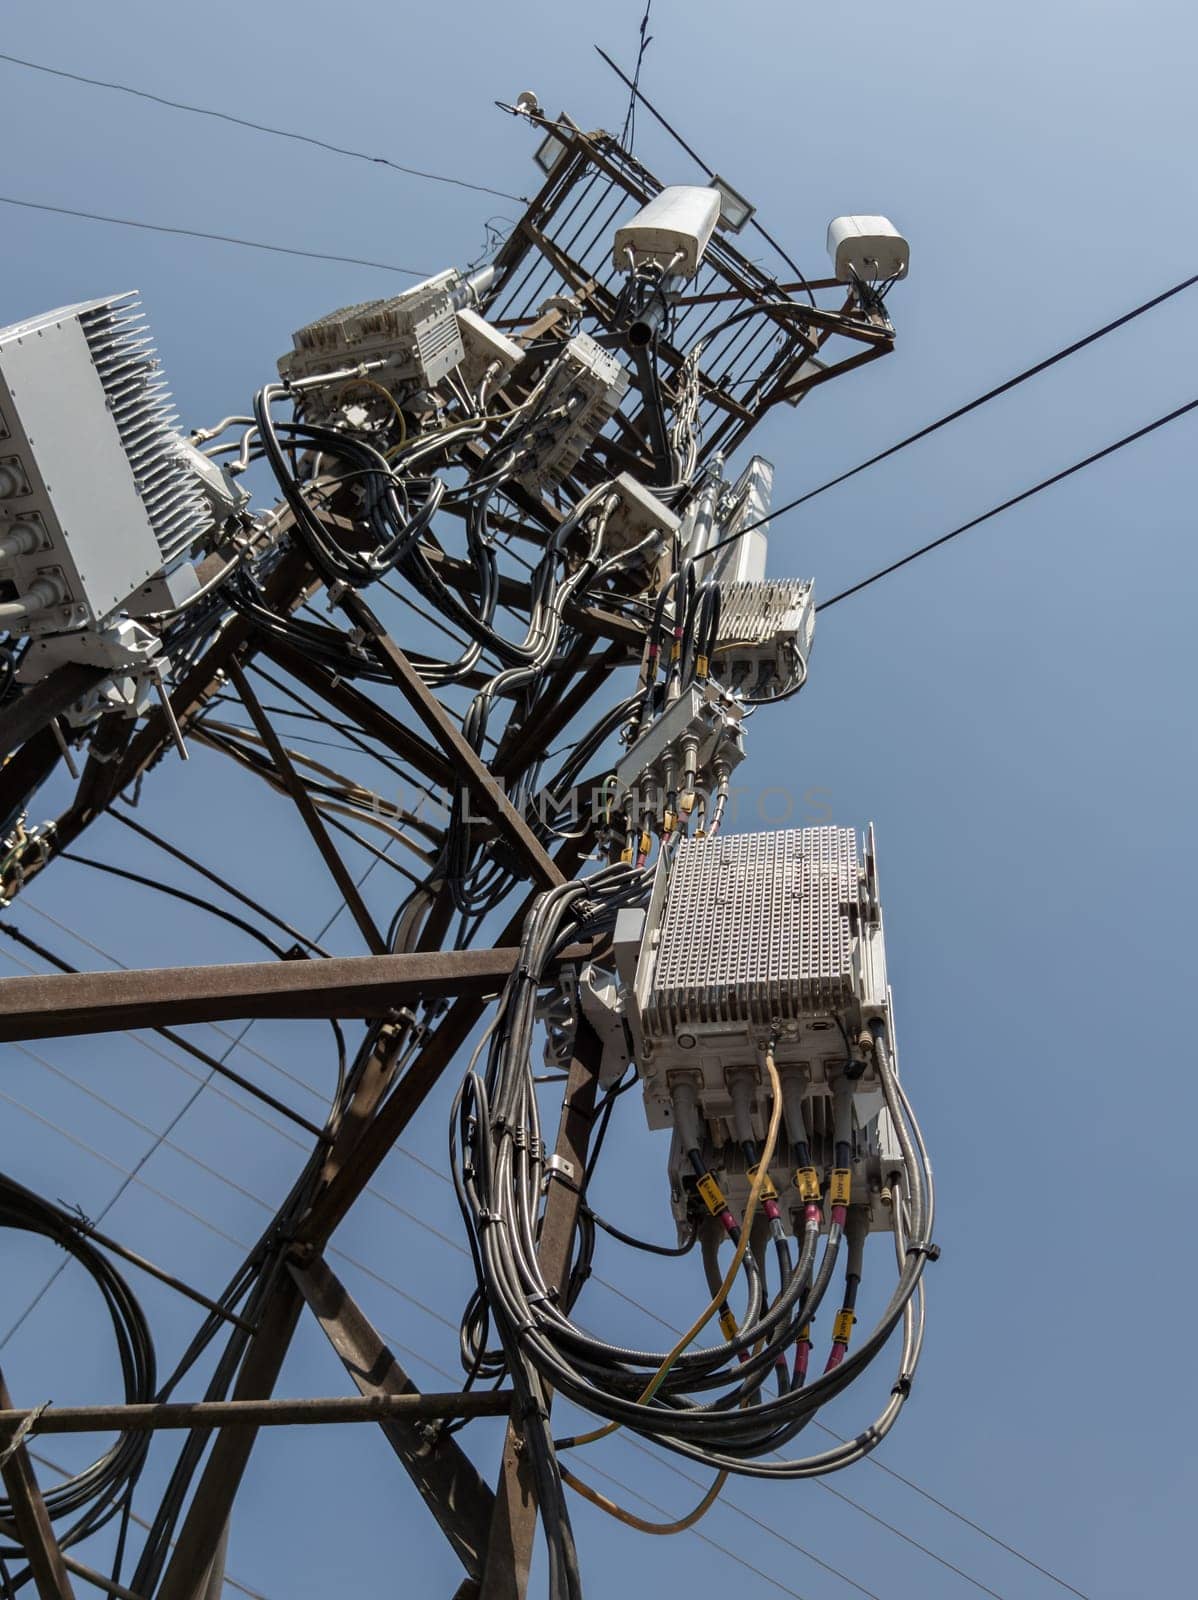 cluttered utility pole with assortment of electronic equipment, including multiple antennas, circuit boxes, and tangled wires against blue sky by z1b